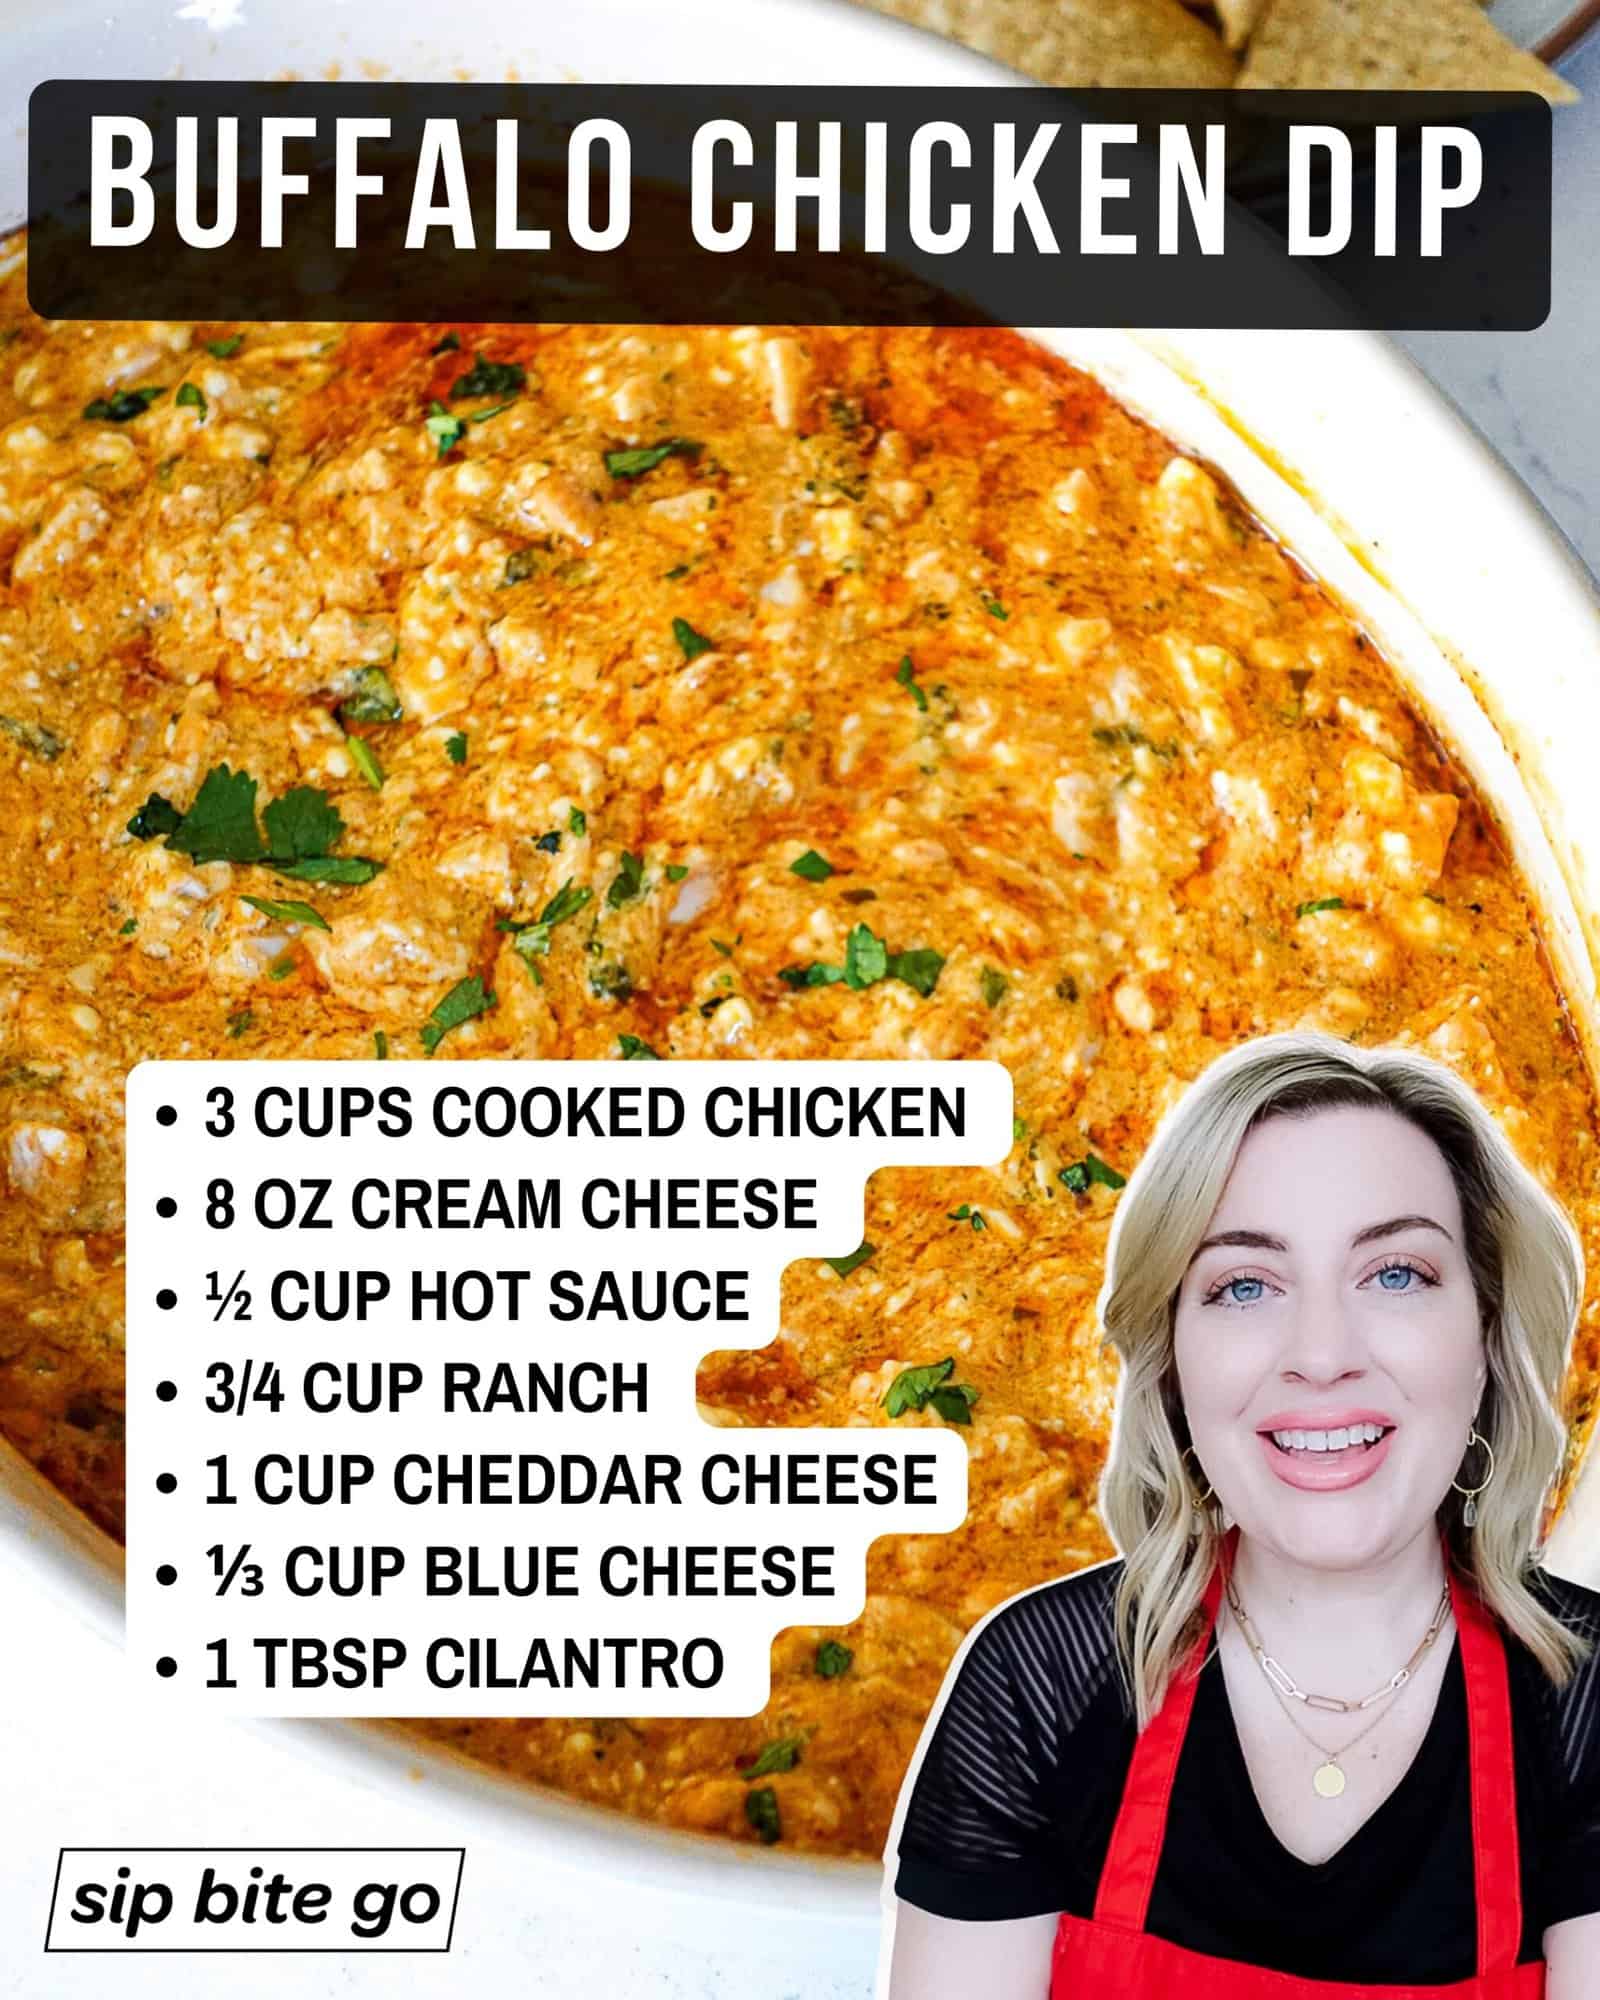 List of ingredients to make buffalo chicken dip